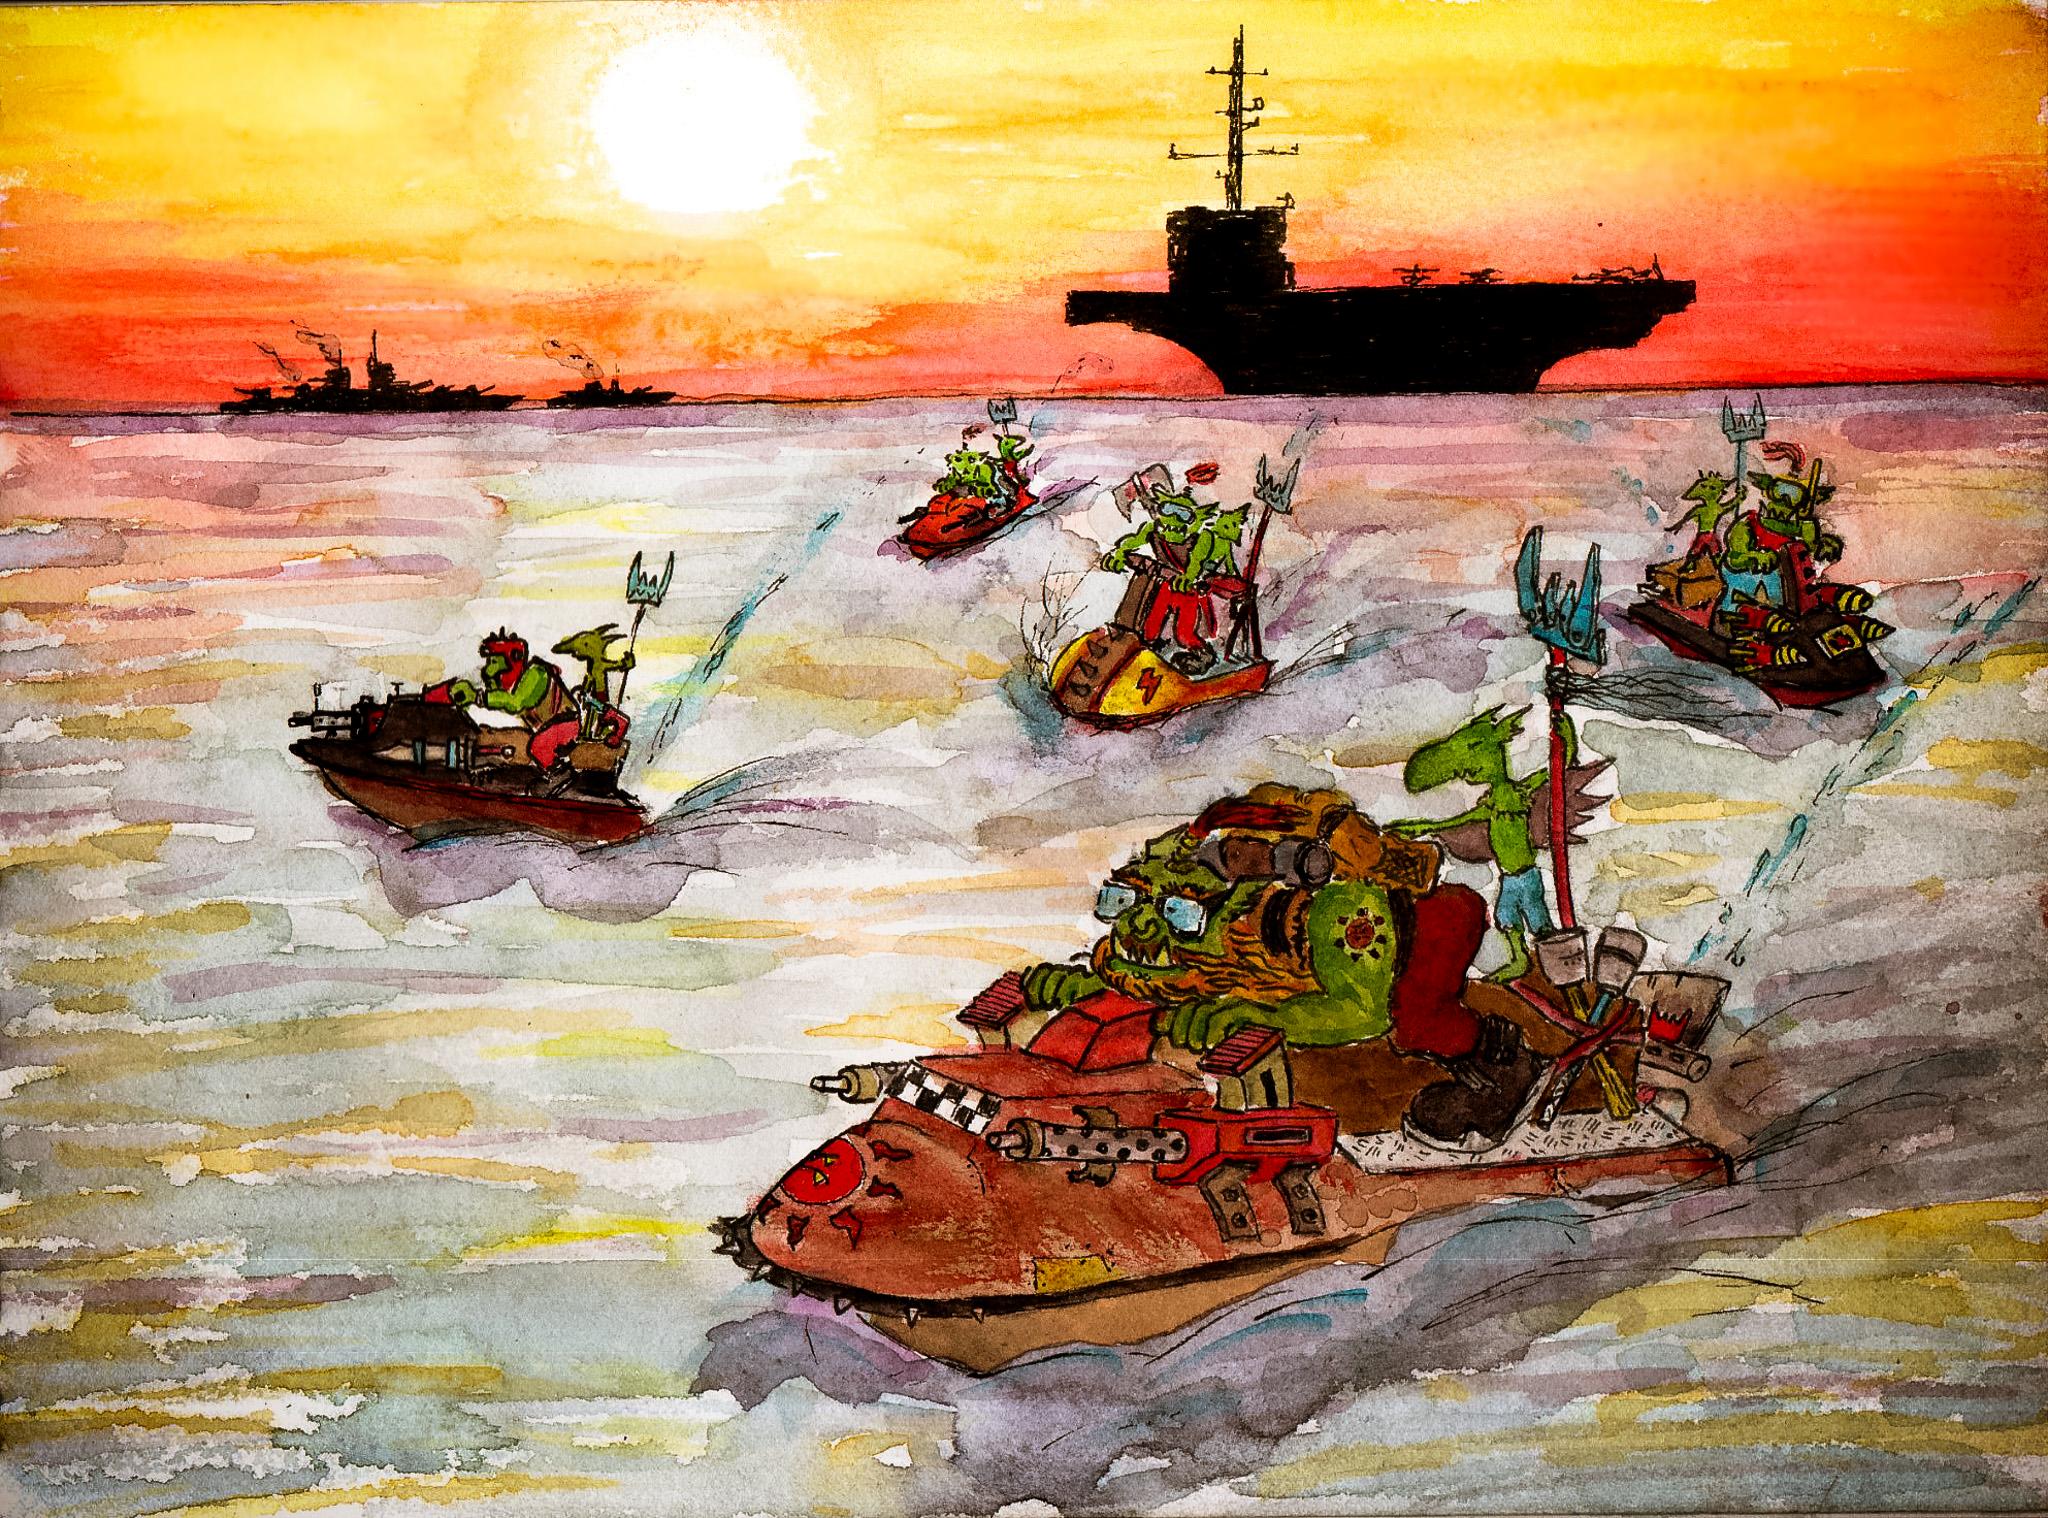 Boat, Cartoon, Drawing, Fiction, Graphic, Grots, Humour, Illustration, Orks, Ship, Sketch